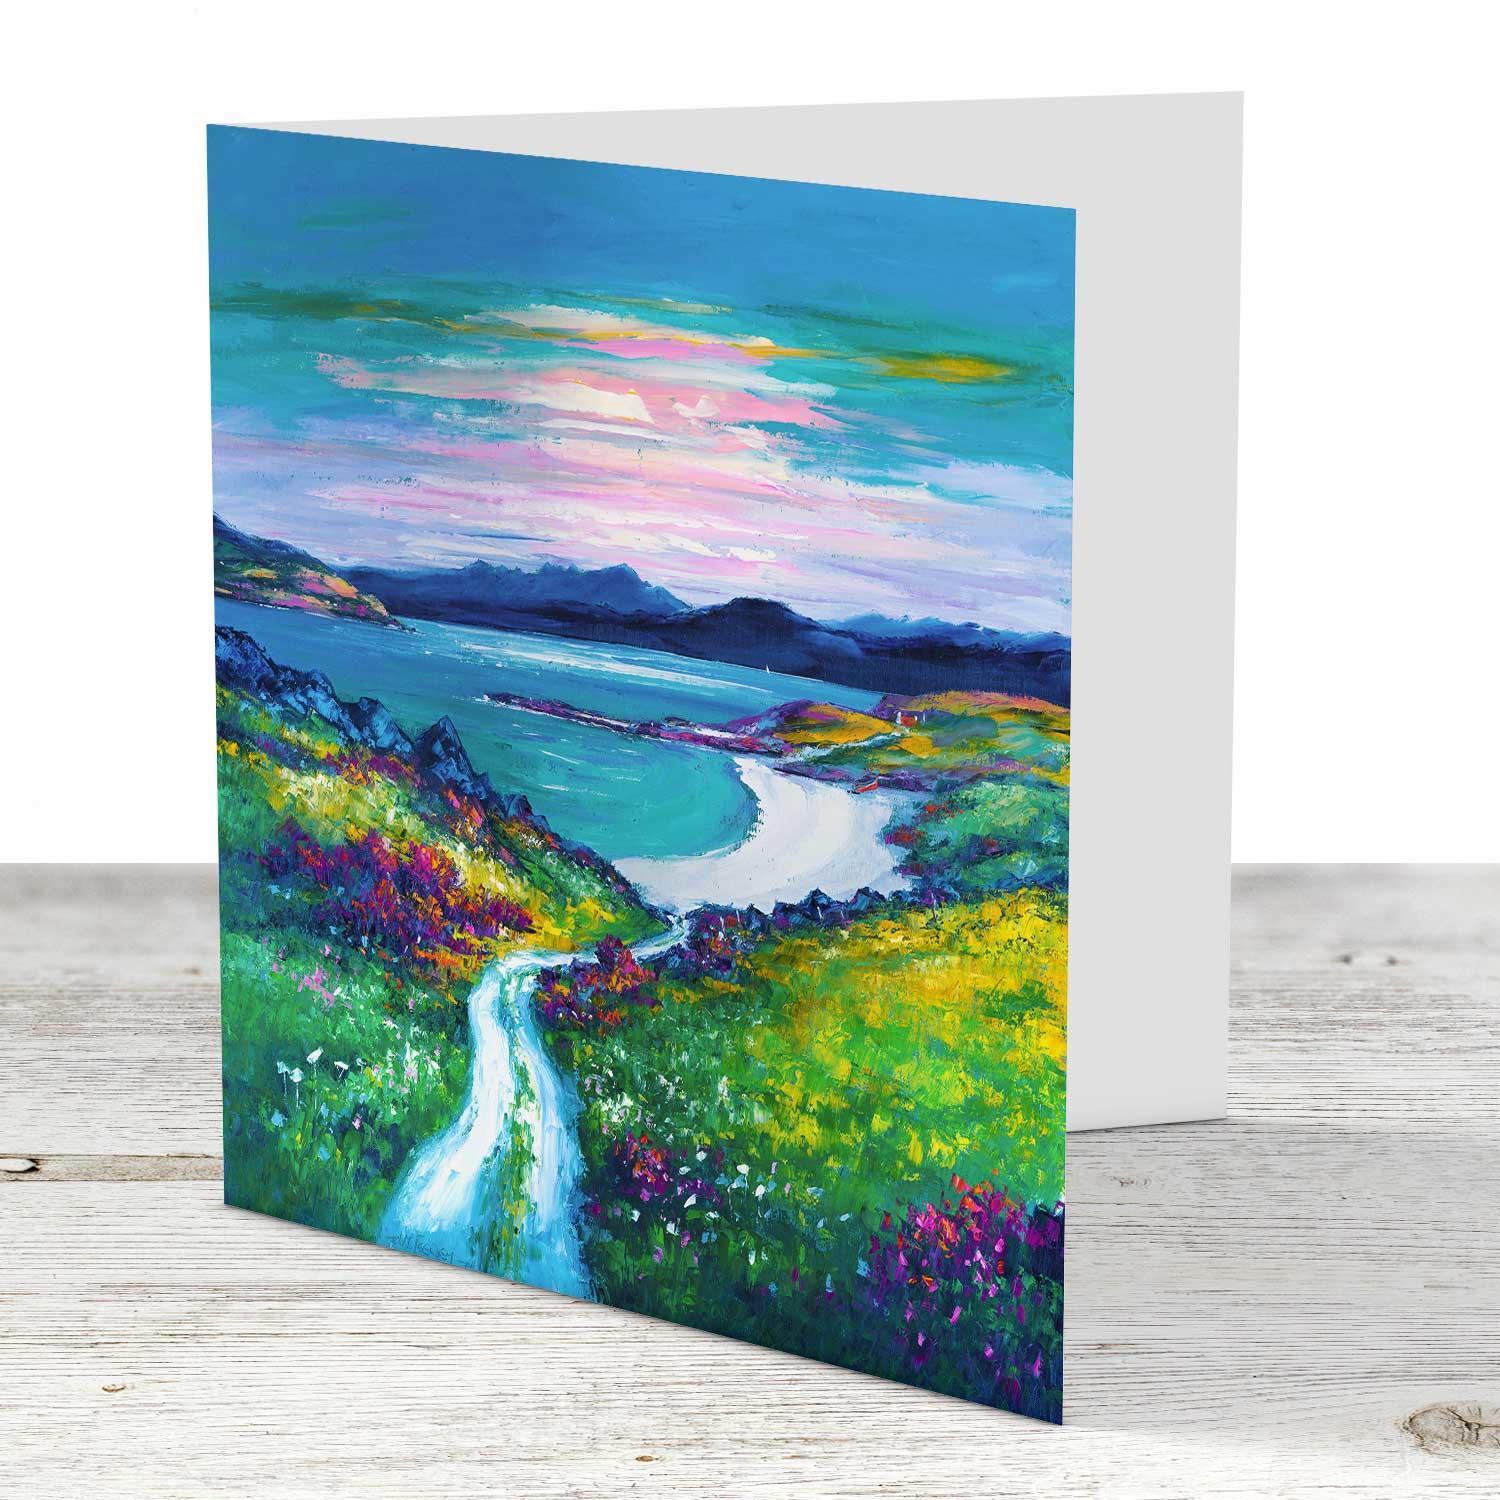 Lone Sail at Dawn, Isle of Skye Greeting Card from an original painting by artist Jean Feeney